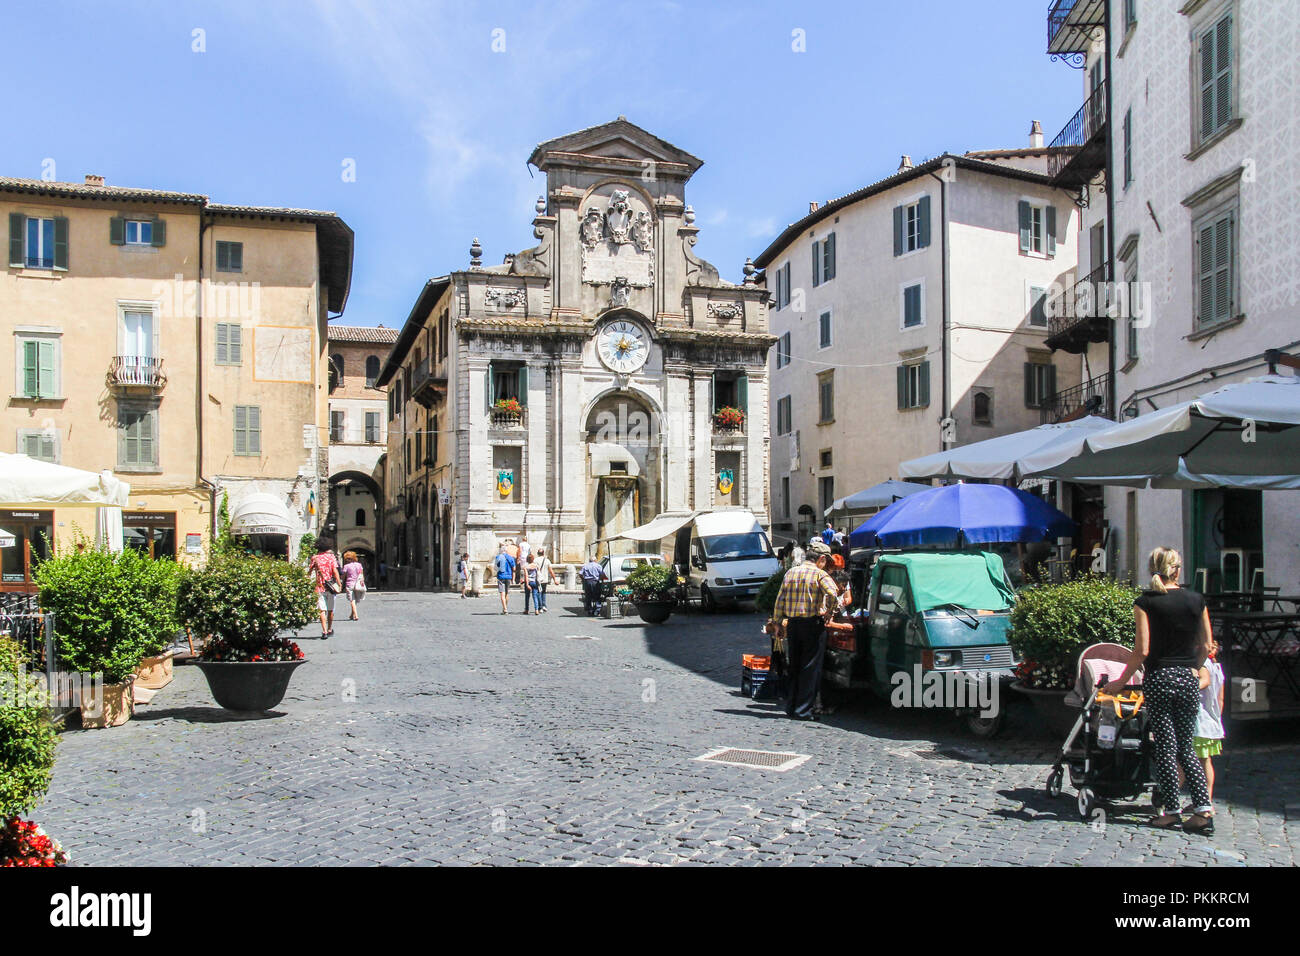 Spoleto, Italy - 2nd August 2016:  The town hall building with clock. The building dates from the 17th century. Stock Photo